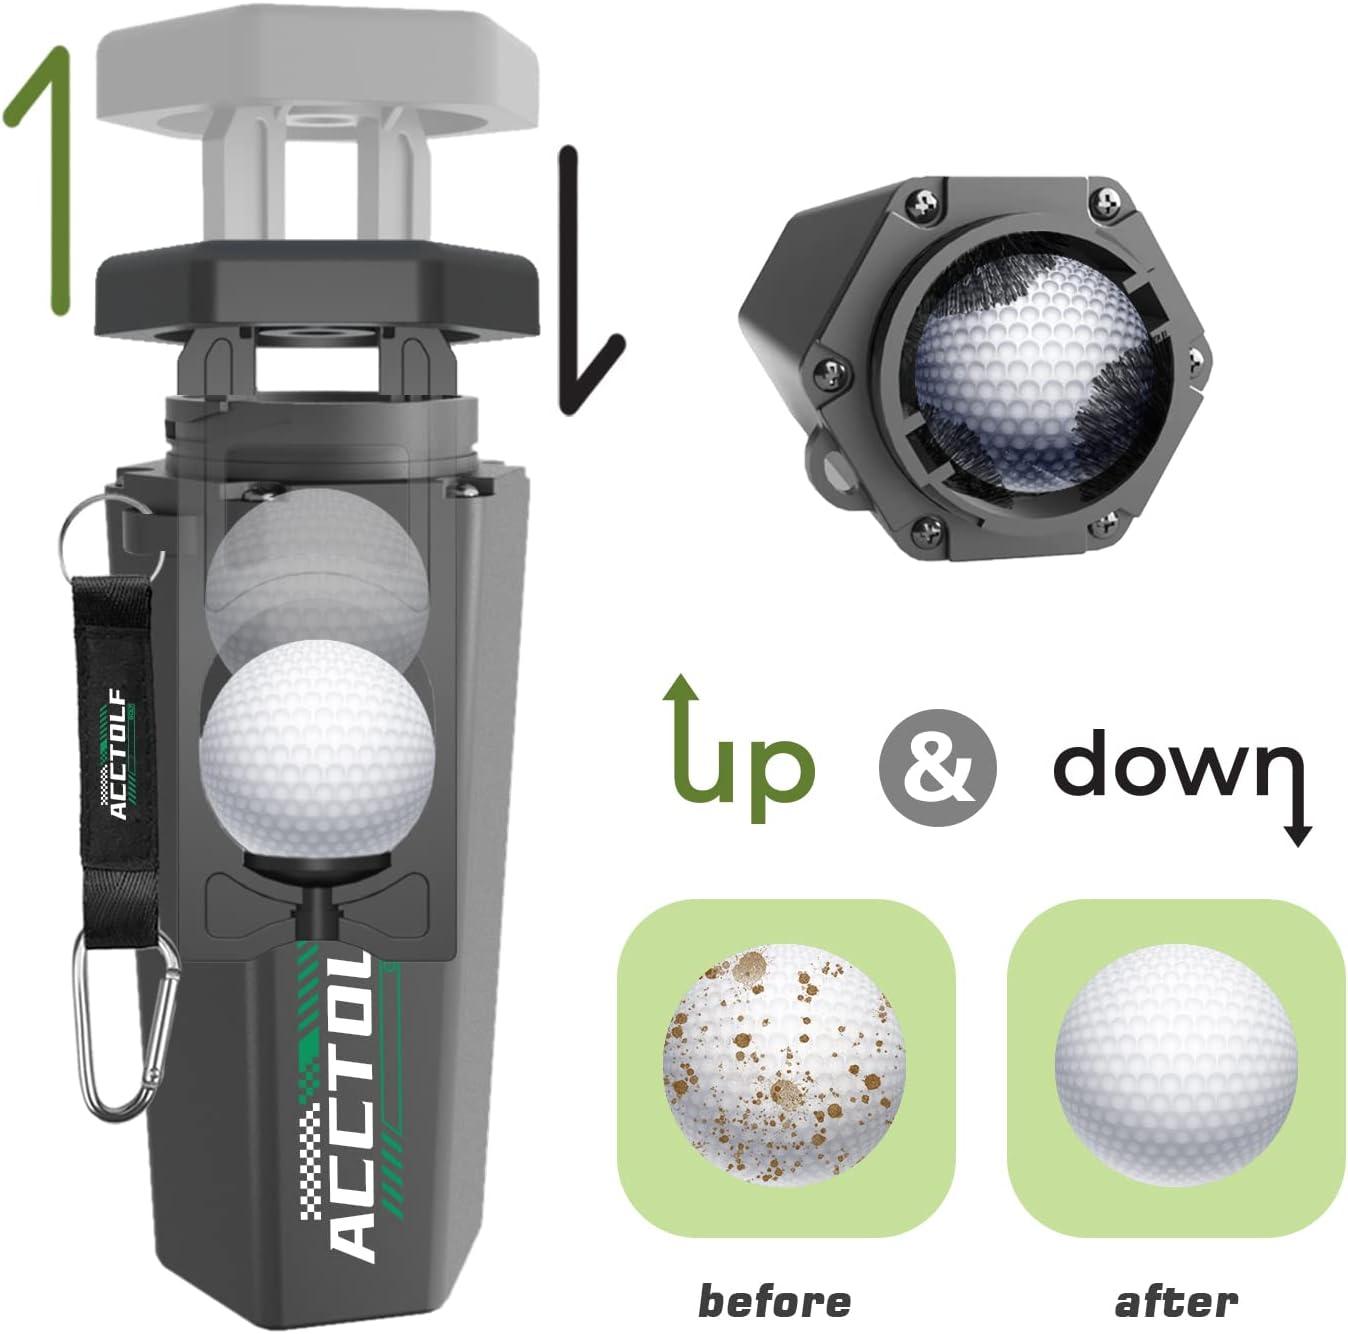 Clean Flight Premium Golf Ball Washer - Portable Cleaner for Golf Bag or  Cart - Best Golf Accessories Gifts for Men & Women.